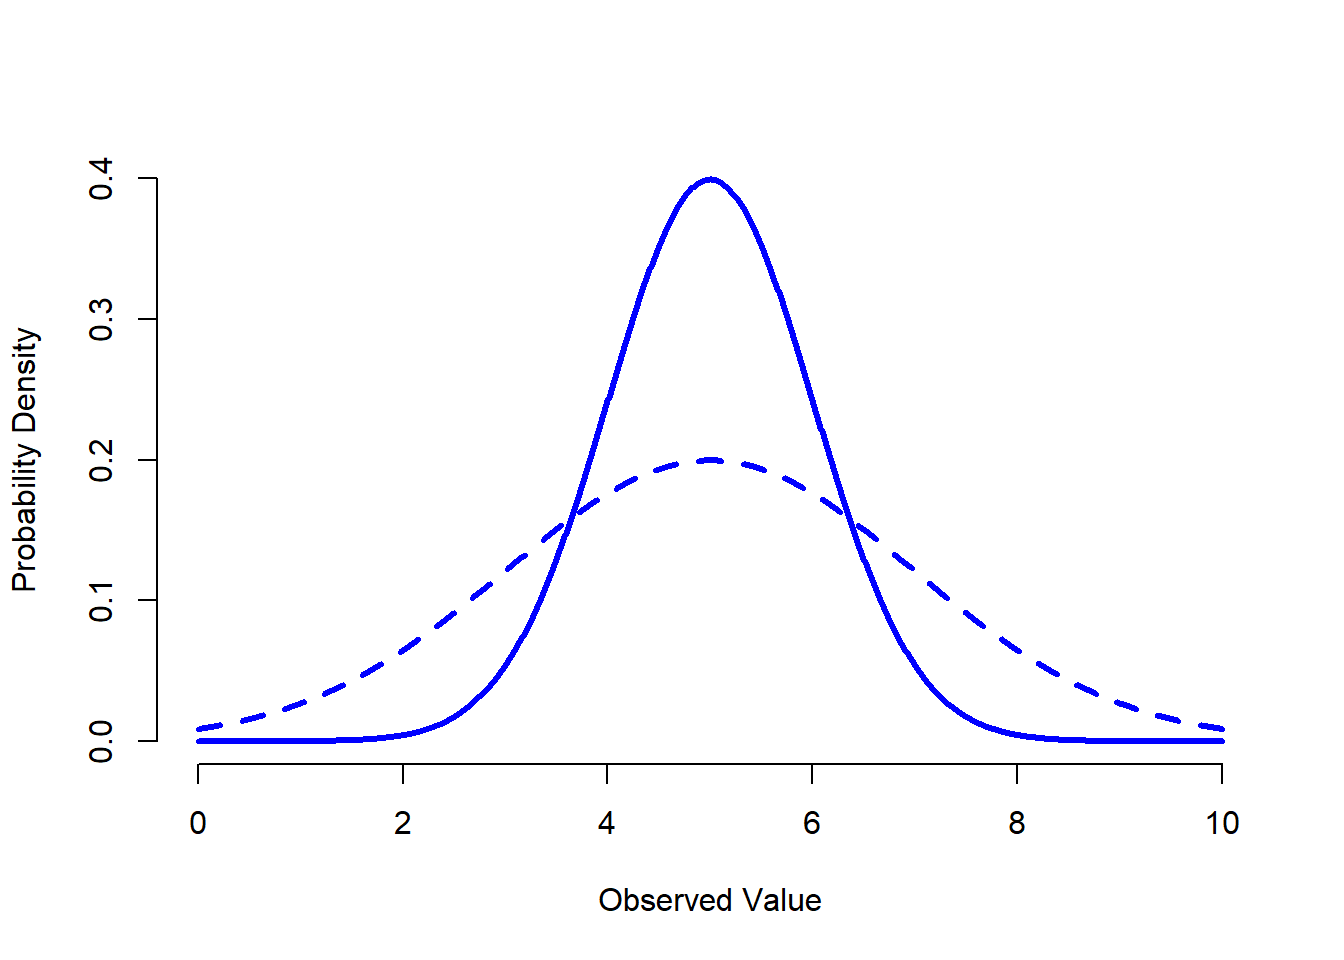 An illustration of what happens when you change the the standard deviation of a normal distribution. Both distributions plotted in this figure have a mean of $mu = 5$, but they have different standard deviations. The solid line plots a distribution with standard deviation $sigma=1$, and the dashed line shows a distribution with standard deviation $sigma = 2$. As a consequence, both distributions are "centred" on the same spot, but the dashed line is wider than the solid one.